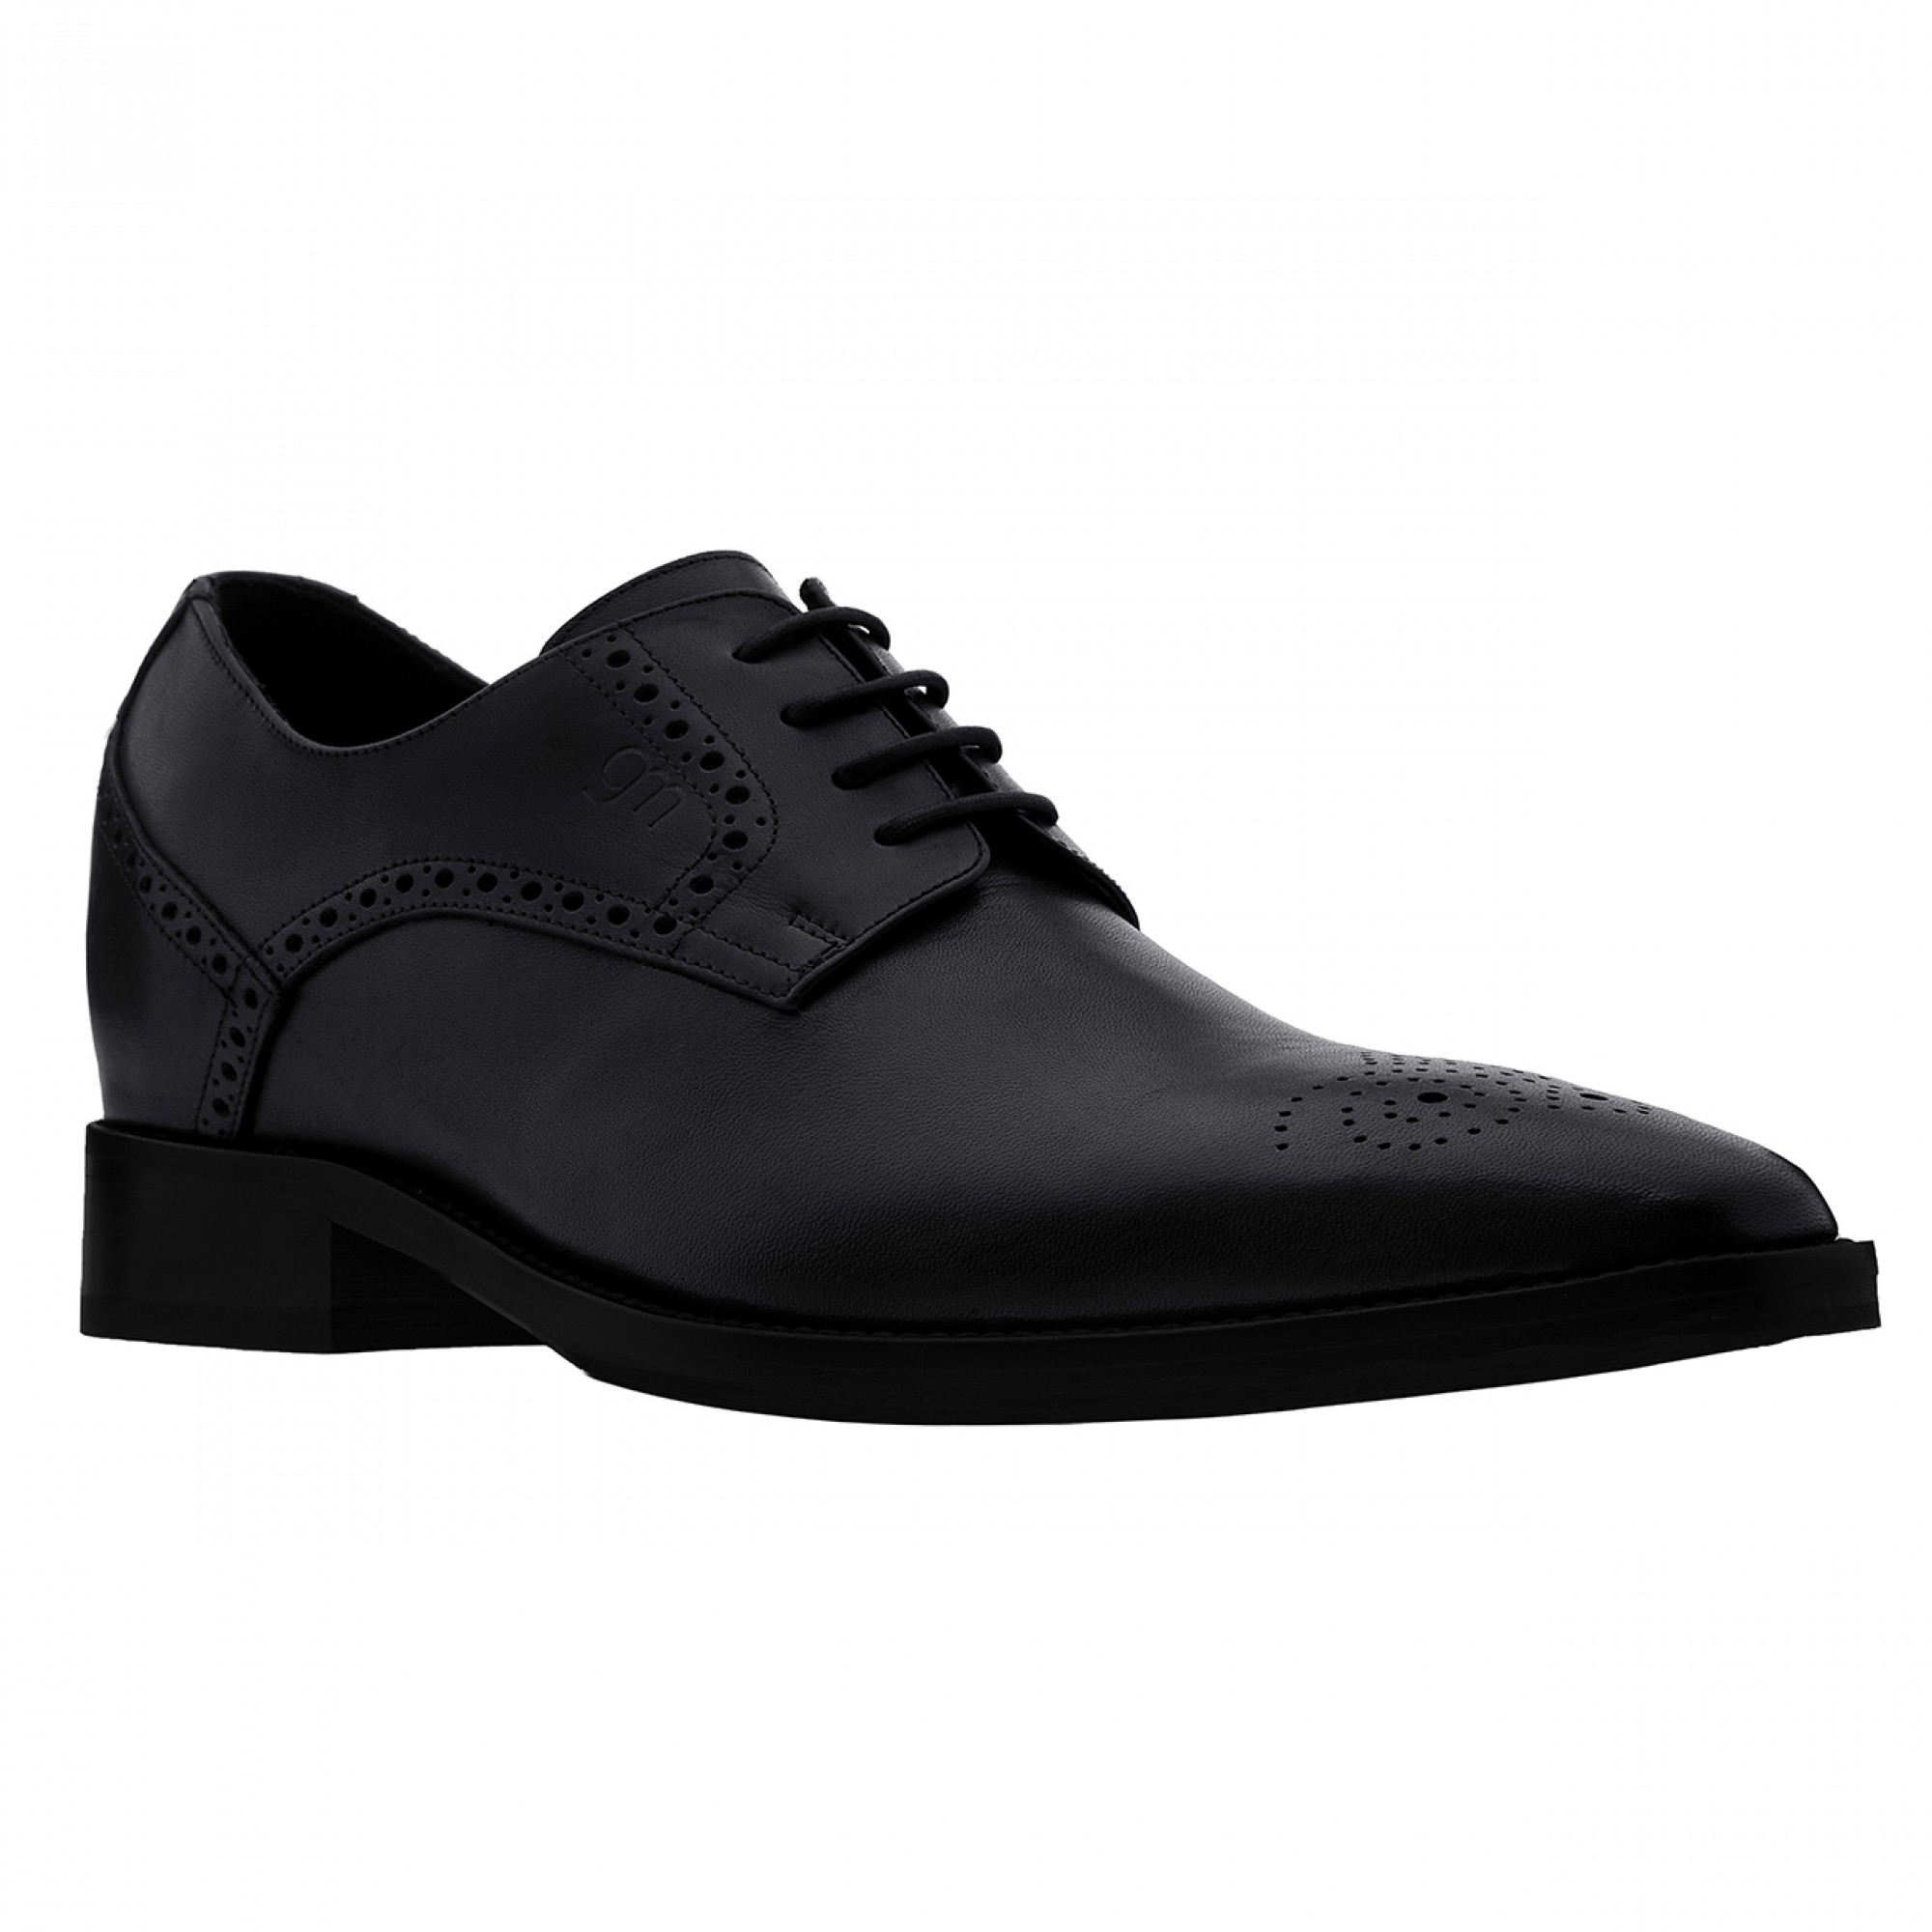 8CM / 3.15 Inches-Elevator Shoes For Men Black Leather Add Height Loafers  Shoes - Elevator Shoes Make You 5-15CM Taller